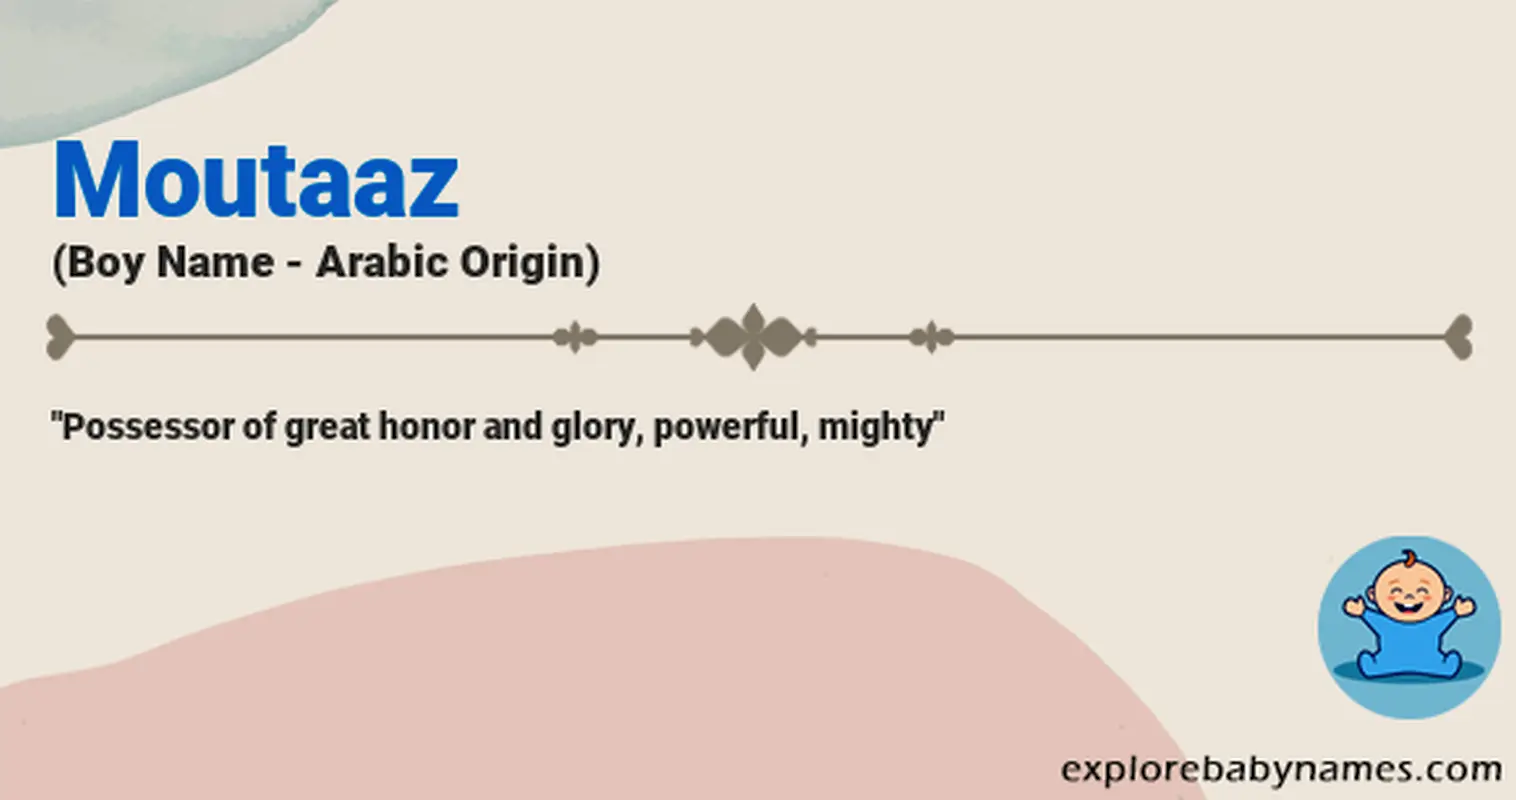 Meaning of Moutaaz